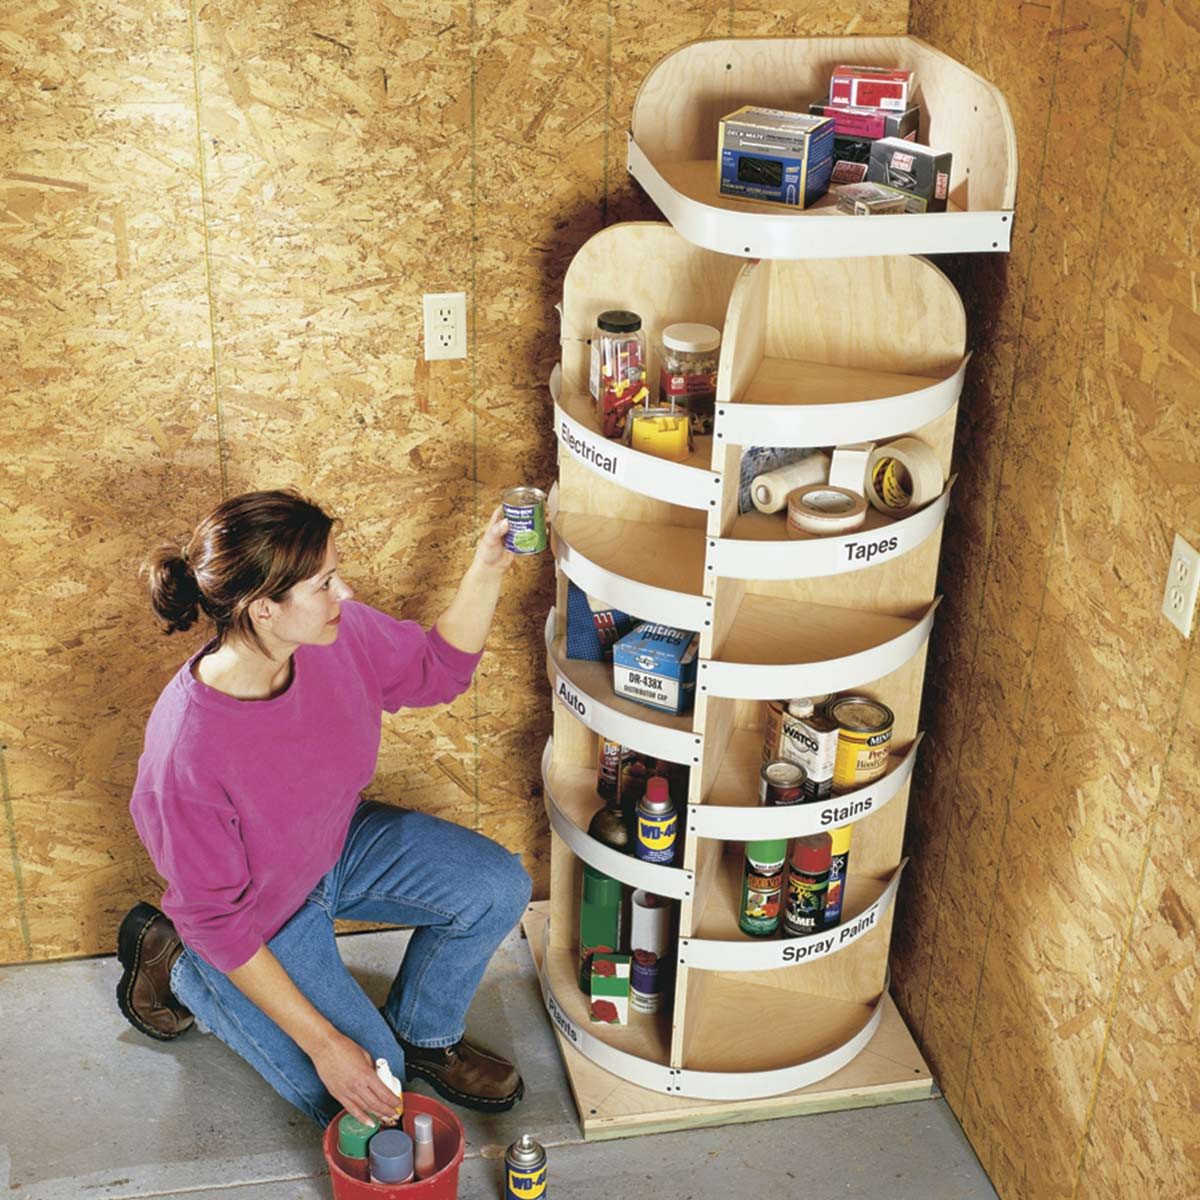 38 Handy Corner Storage Ideas that will Help You Maximize Your